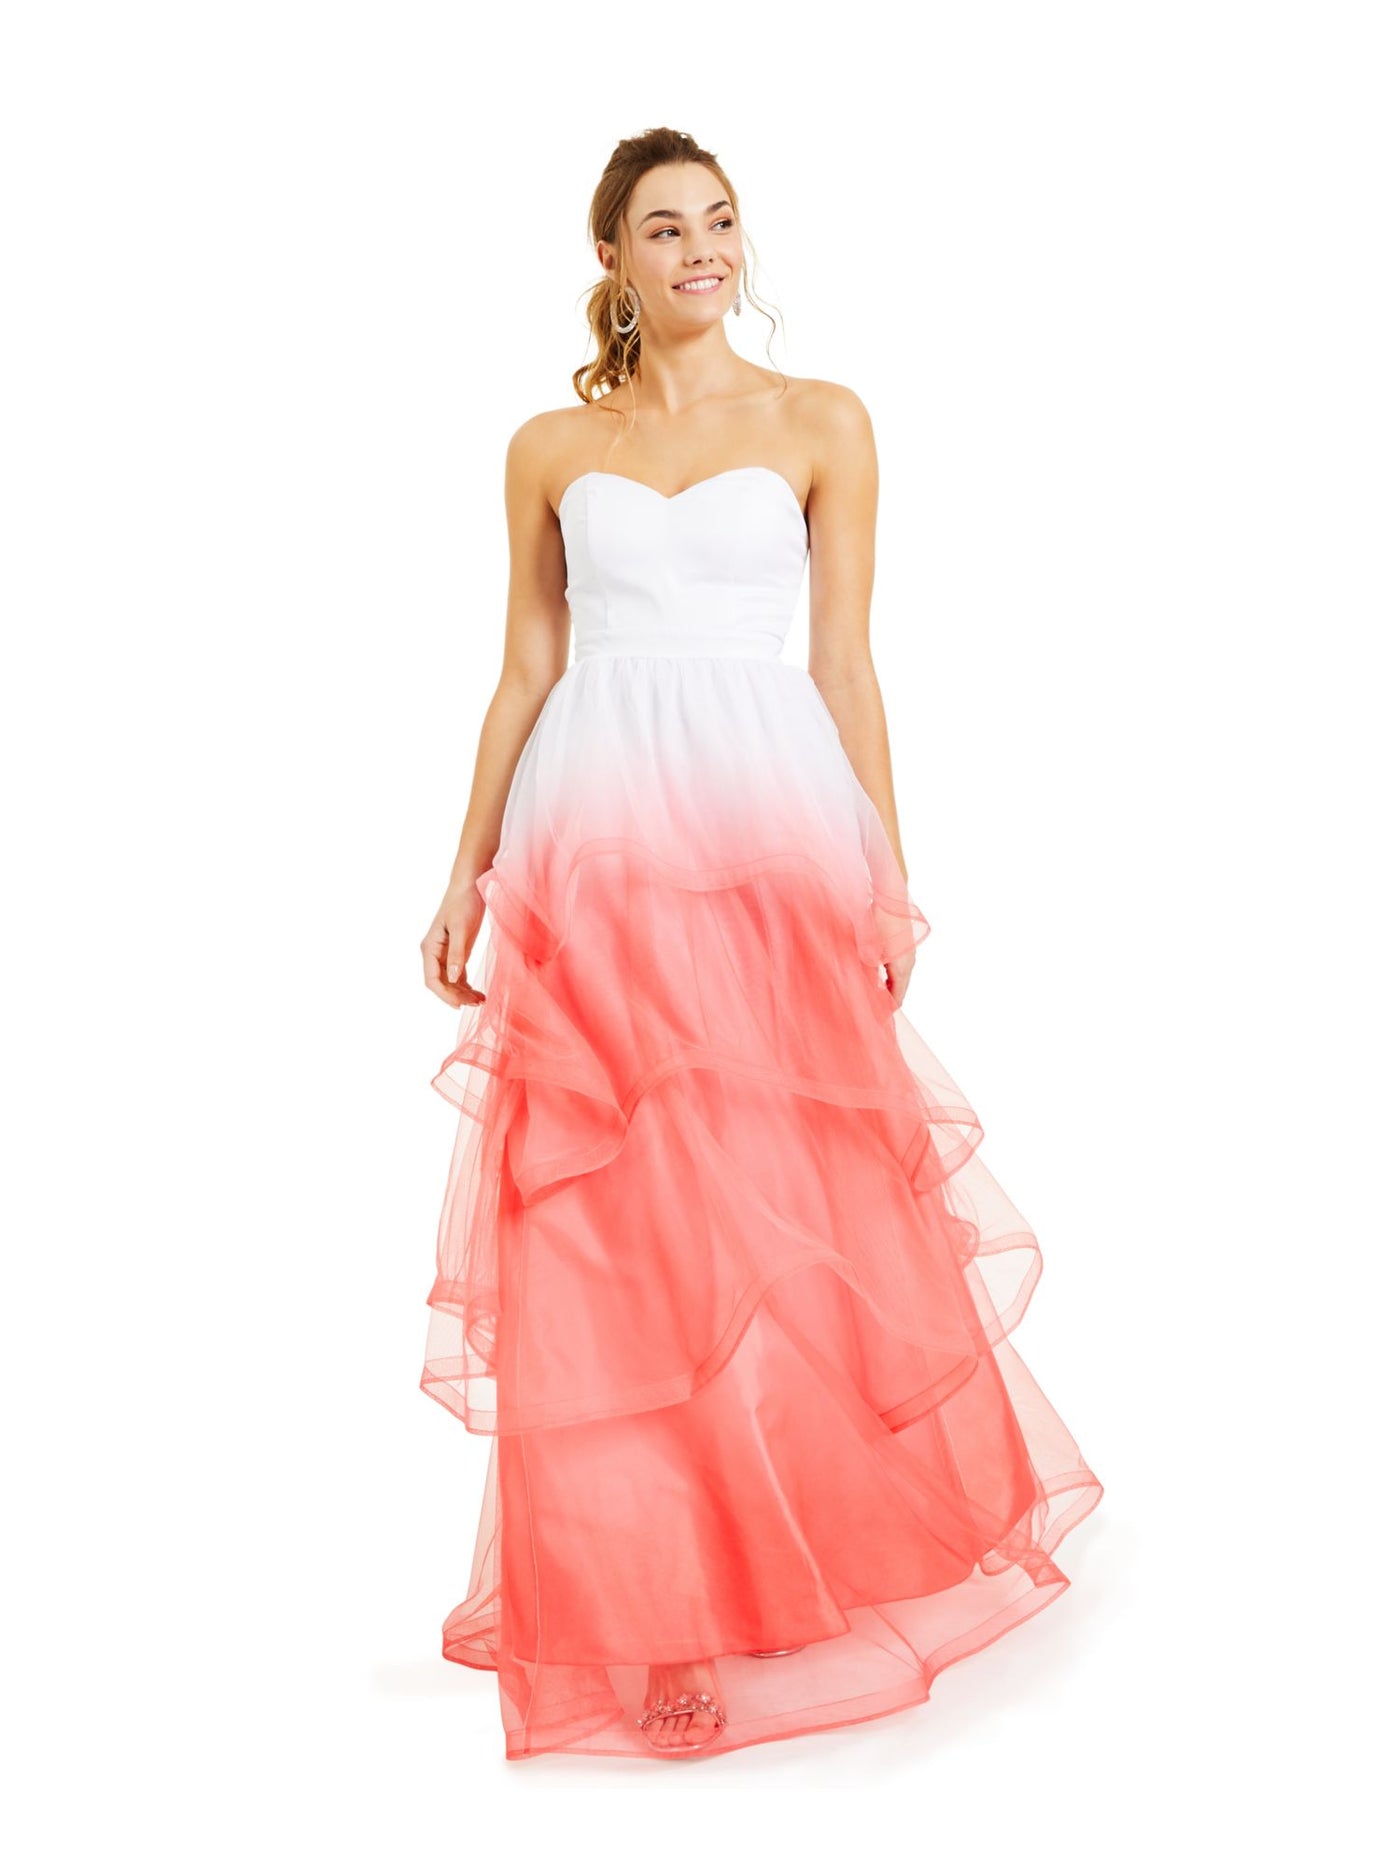 CRYSTAL DOLLS Womens Coral Ombre Strapless Full-Length Formal Fit + Flare Dress Juniors 5